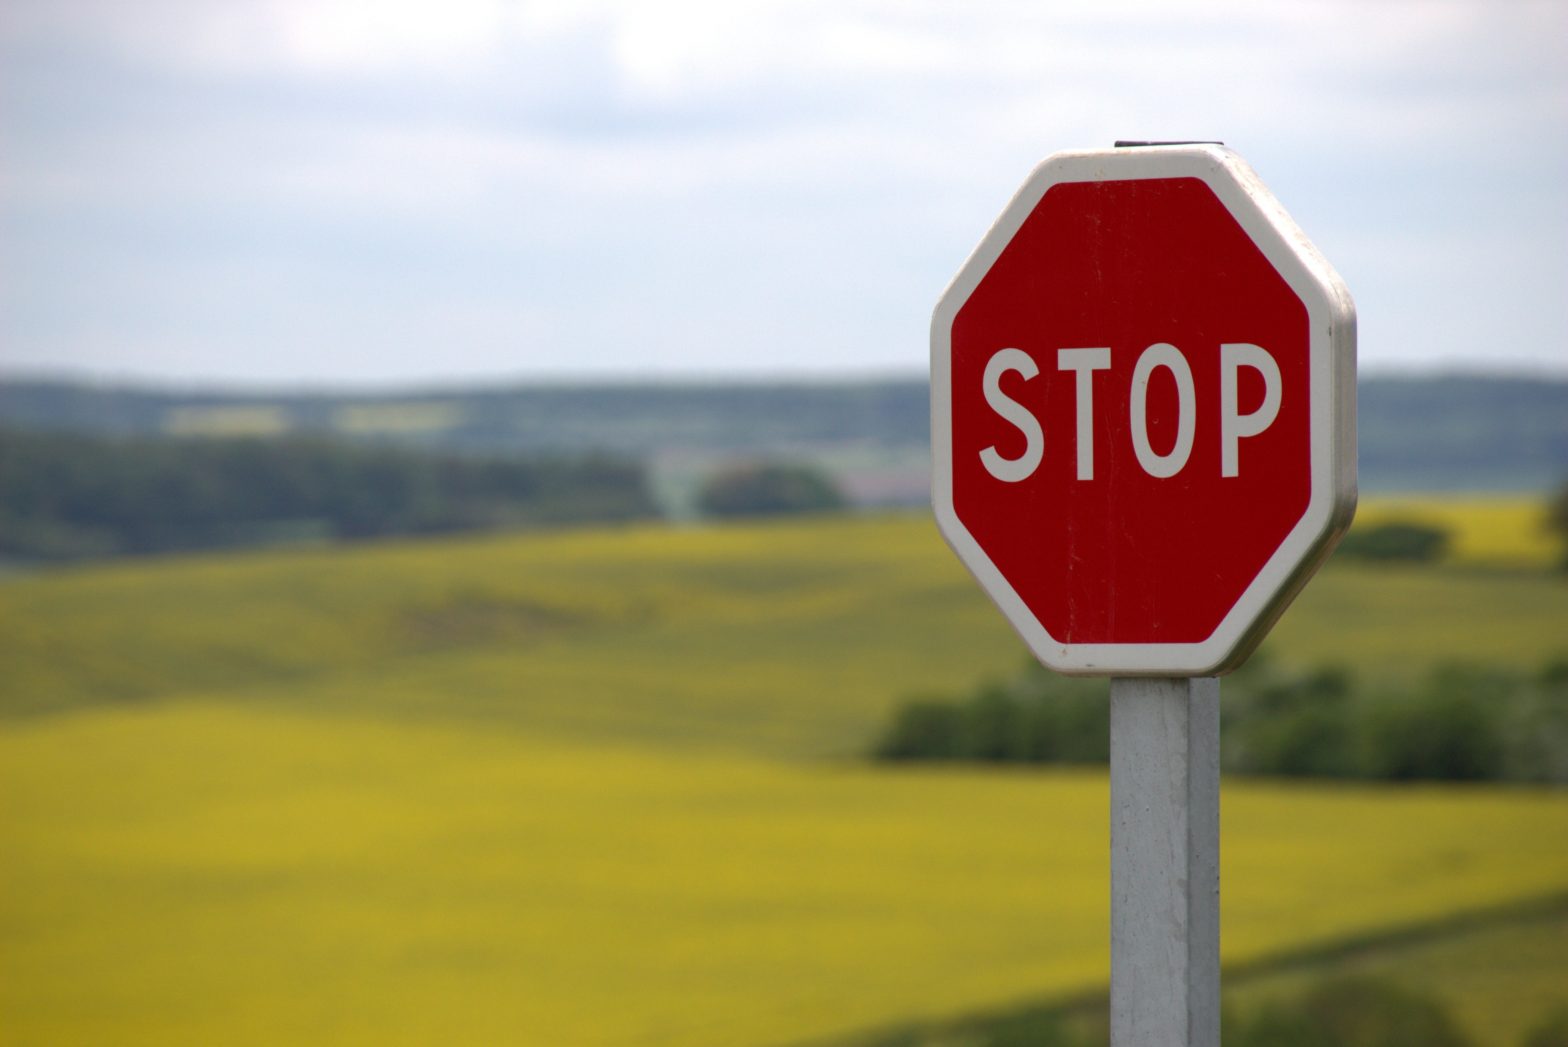 Now on Belladonna Comedy: We Must Put An End to Government Overreach, Which Is Why I’m Burning Down These Stop Signs